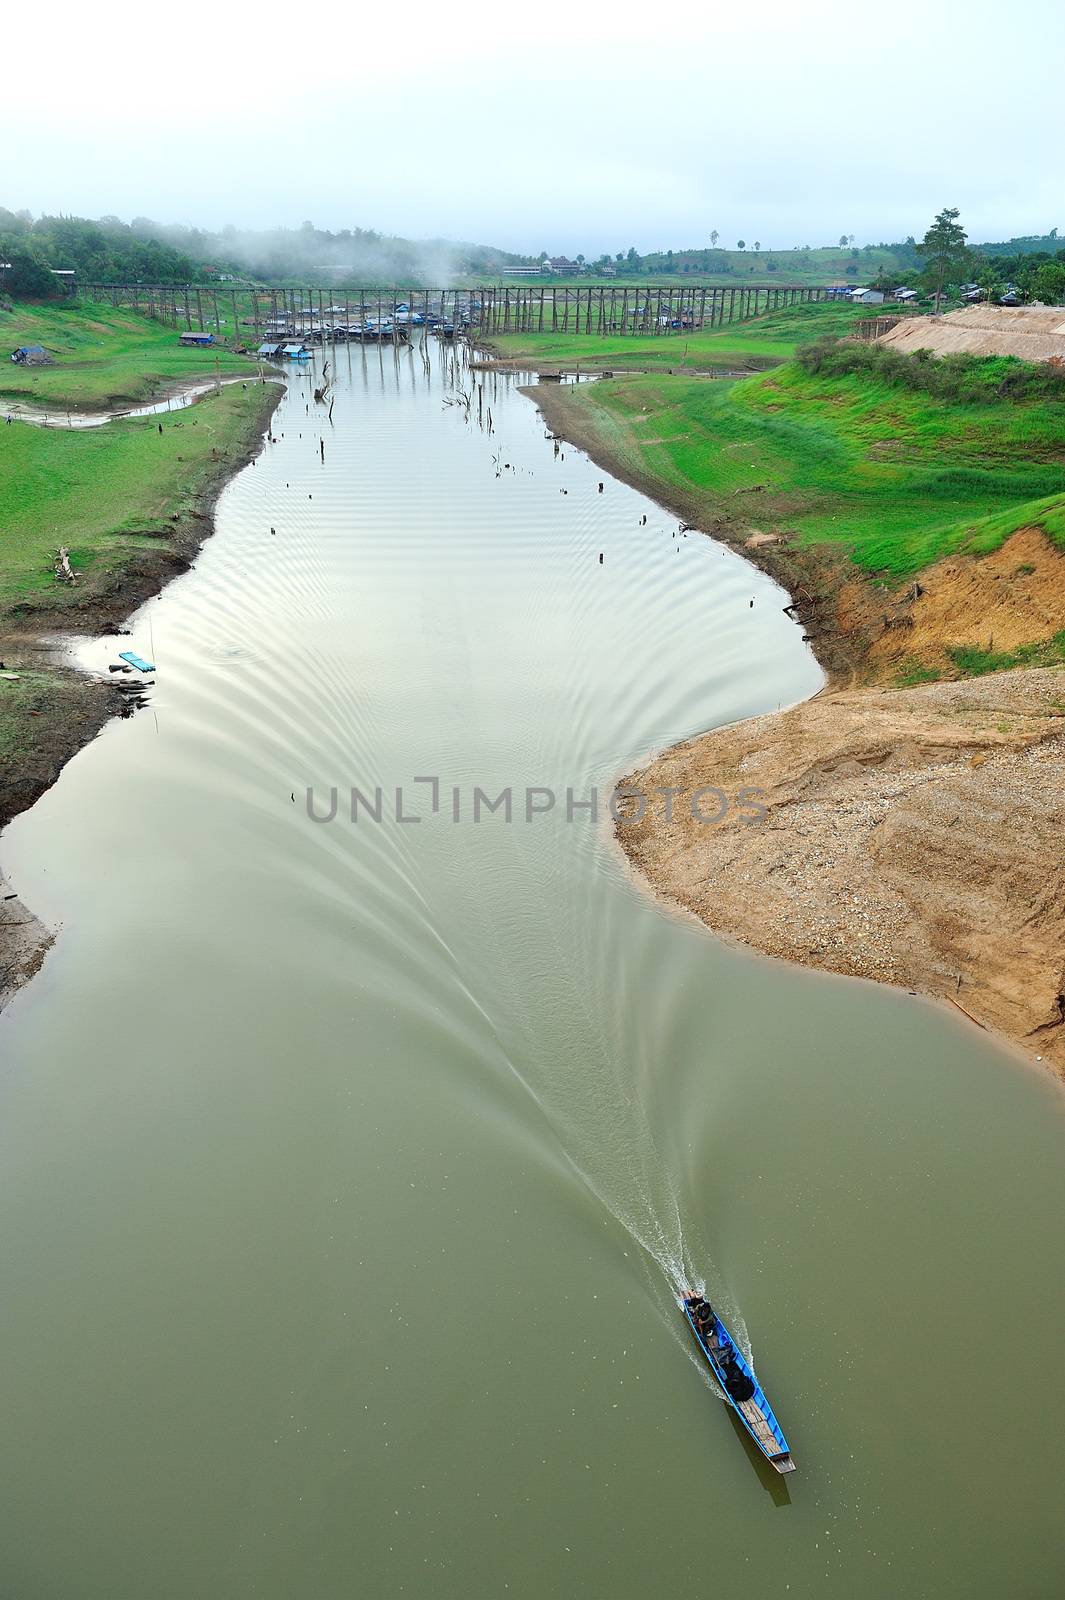 drought land and beautiful place in thailand. Sangkraburi, Kanch by think4photop